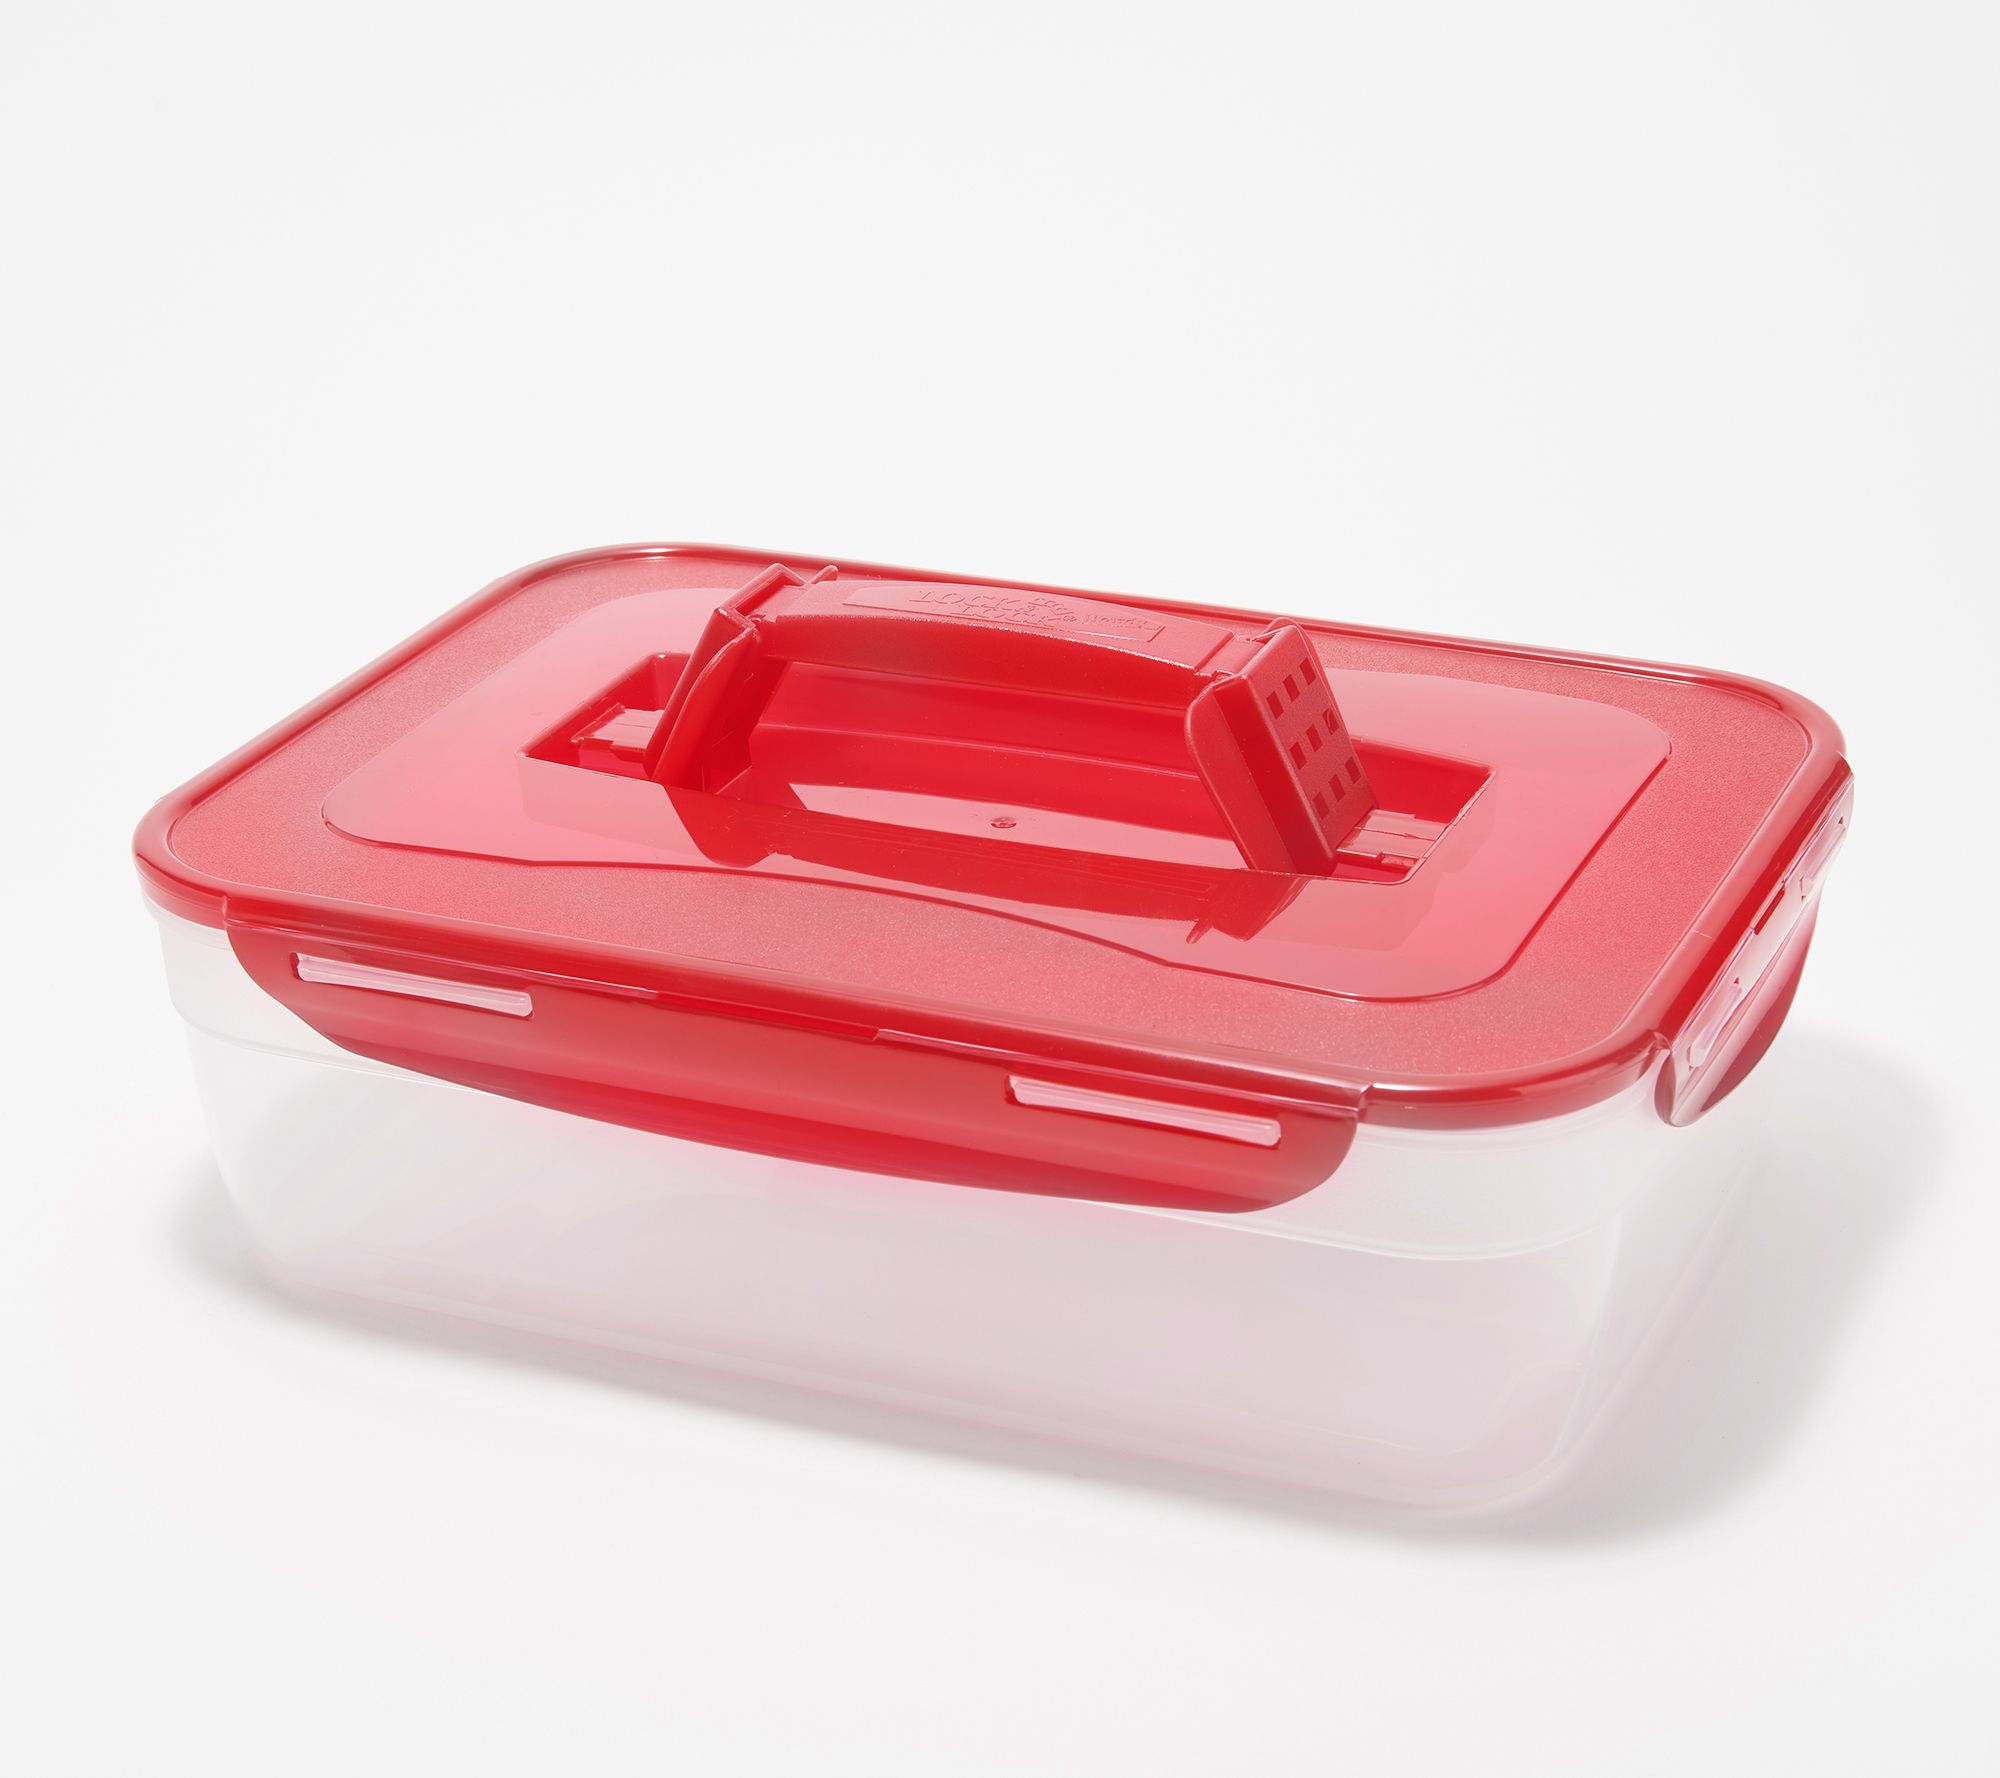 Tupperware Square Rounds 8 oz 1/2 Size Freezer Mini Containers Set 2 Pink  Coral